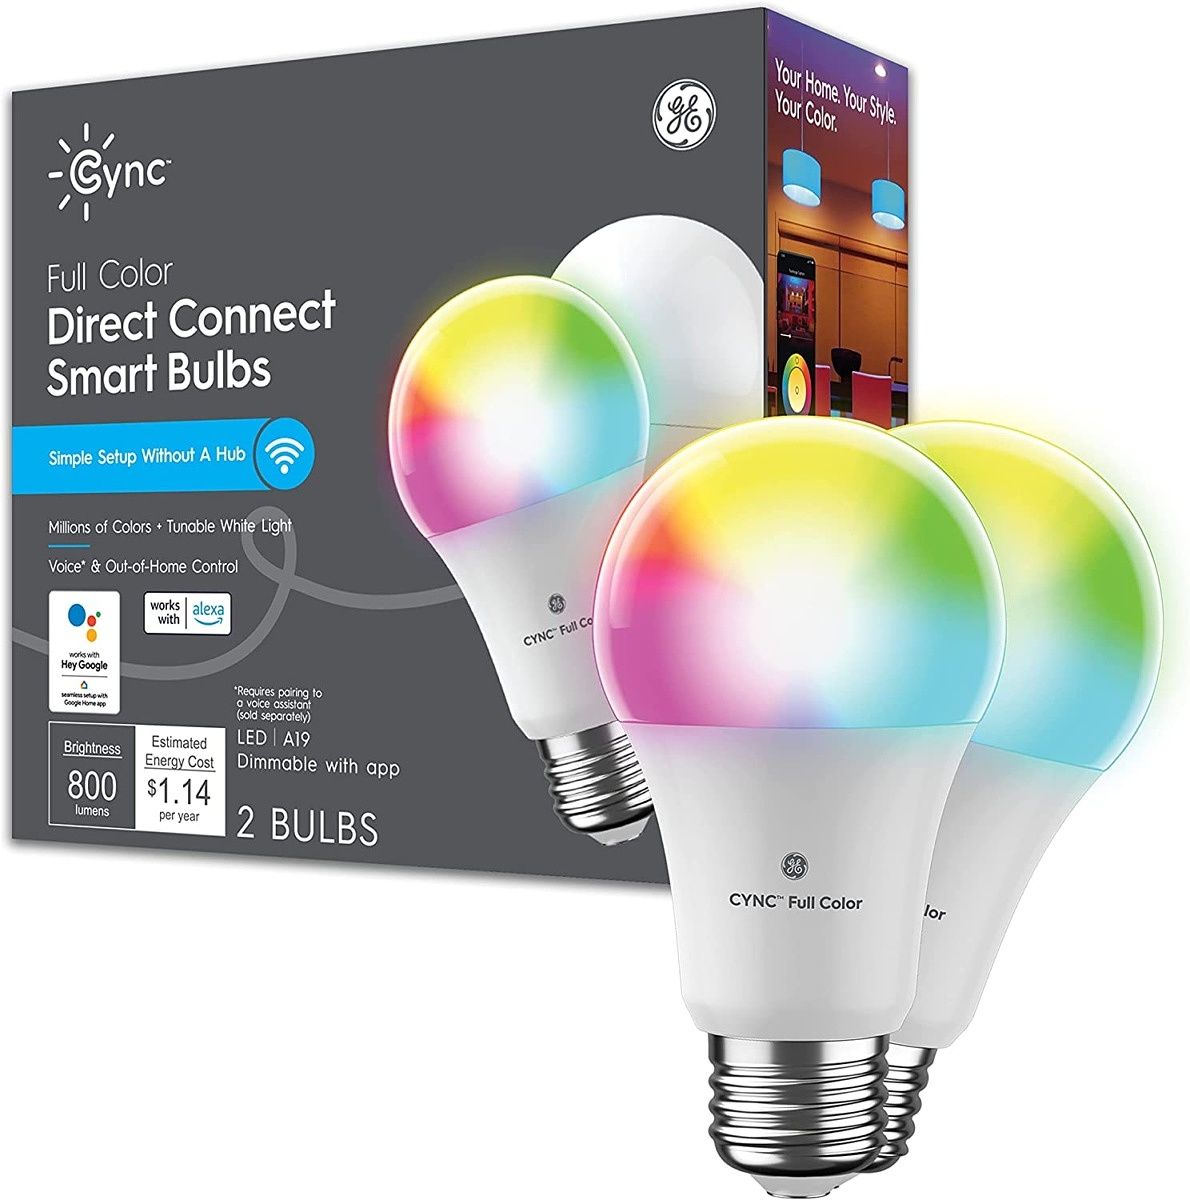 GE Cync is a whole ecosystem of smart home products including cameras and thermostats that are more affordable than some competitors while offering similar features. If you just want some great, affordable, Google-compatible smart bulbs, though, they're an easy recommendation.